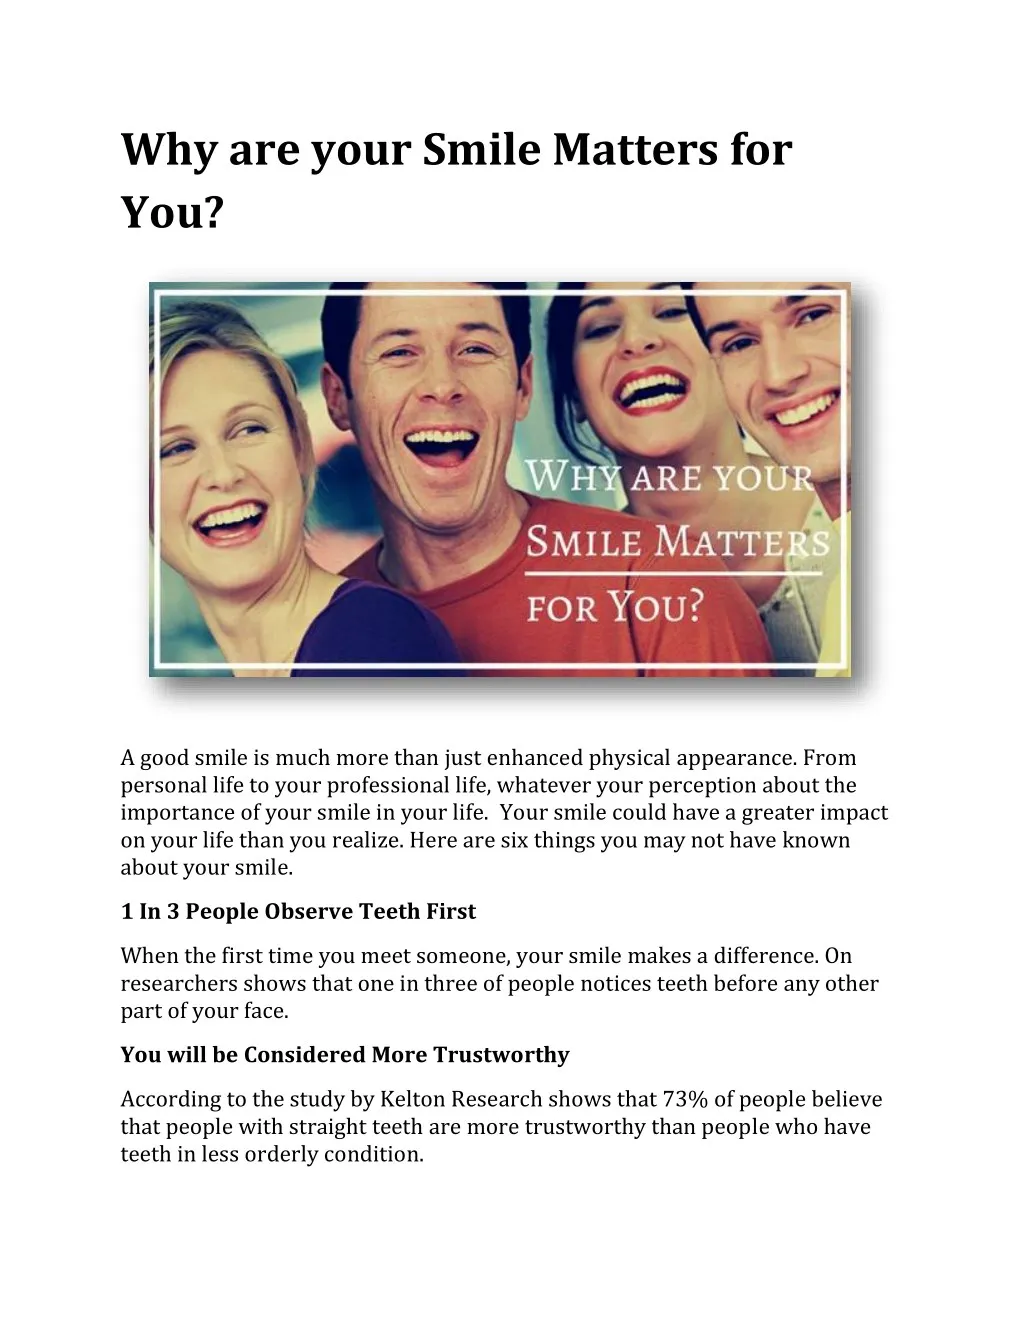 why are your smile matters for you